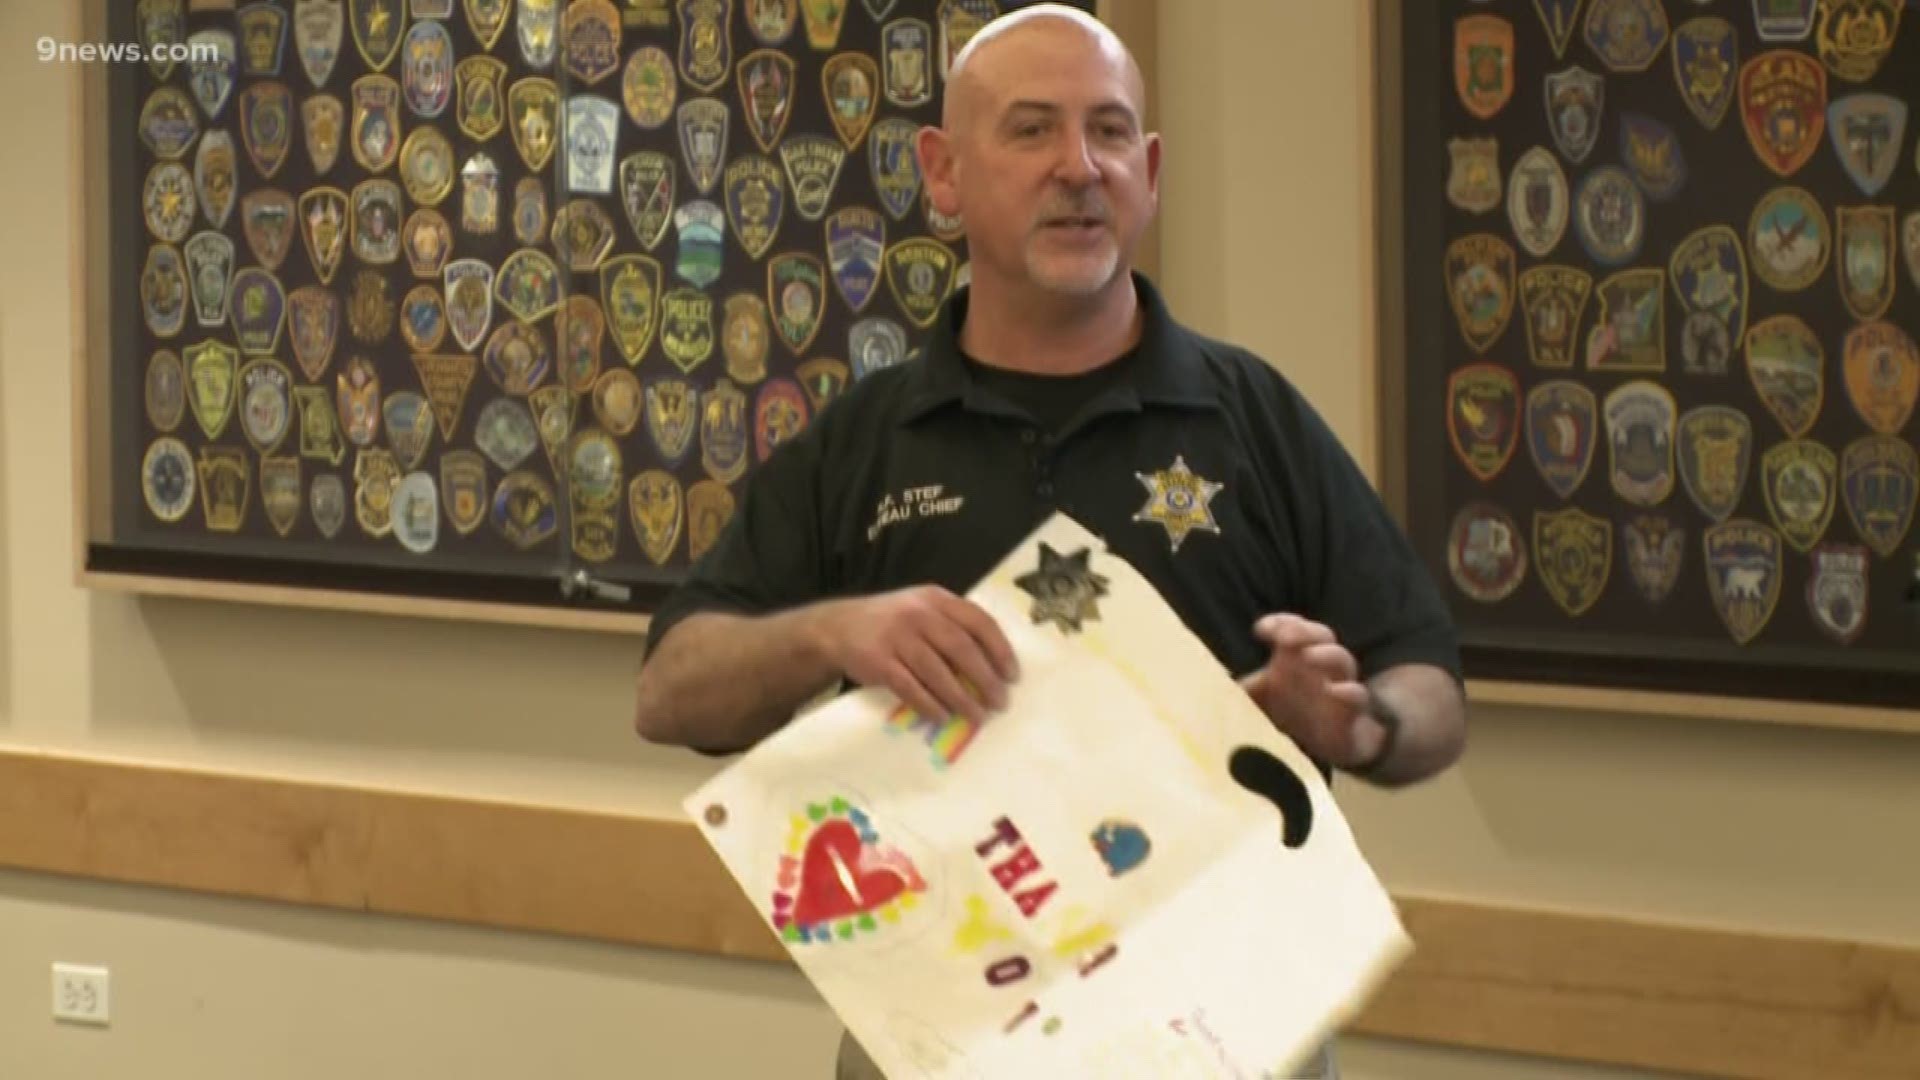 As a thank you, STEM School Highlands Ranch students sent a box full of cards, candy snacks, and coffee to the Arapahoe County Sheriff's Office.